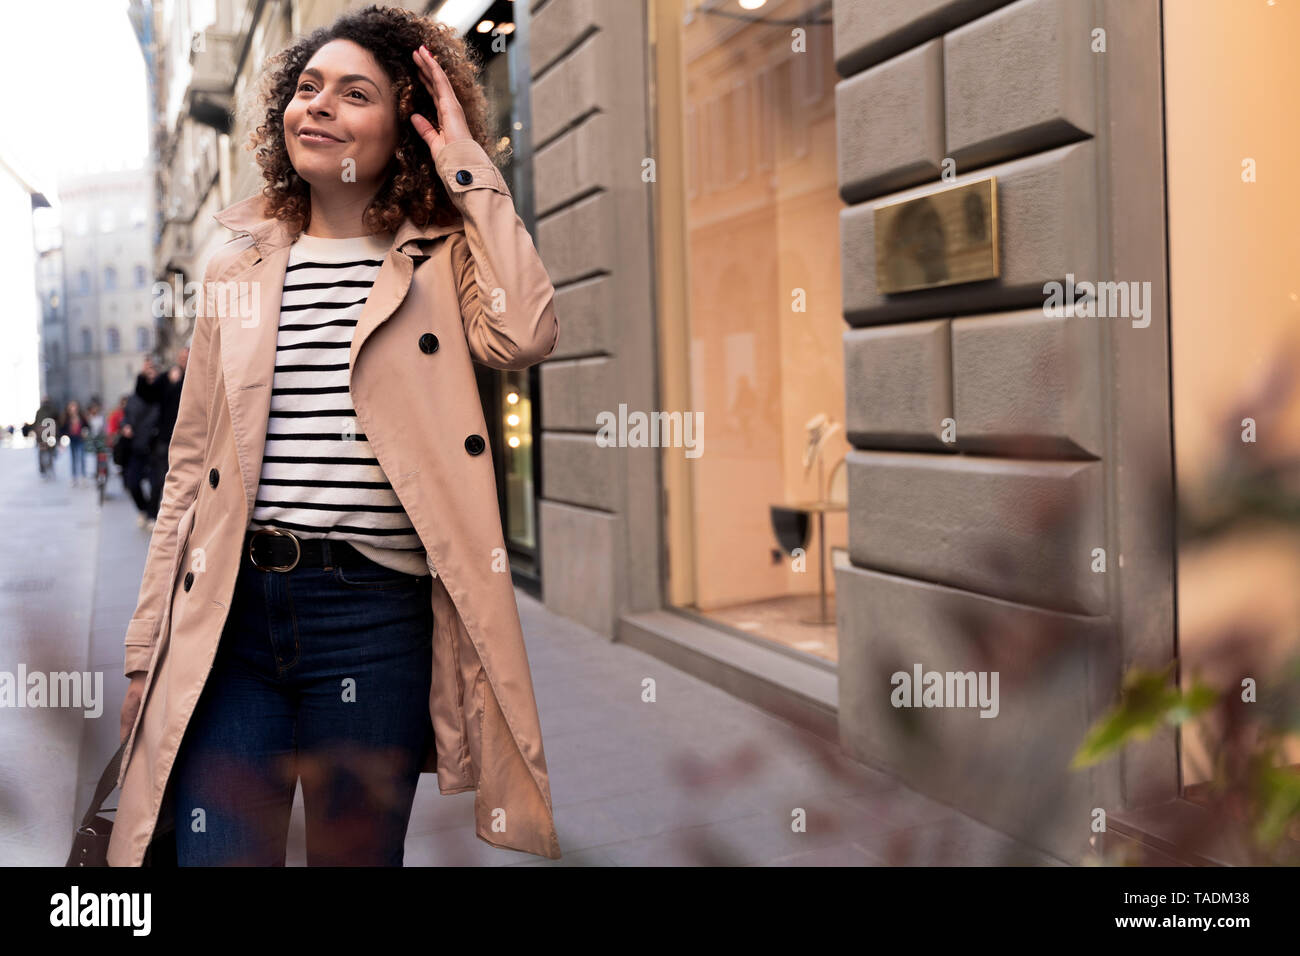 Smiling woman walking in the city Stock Photo